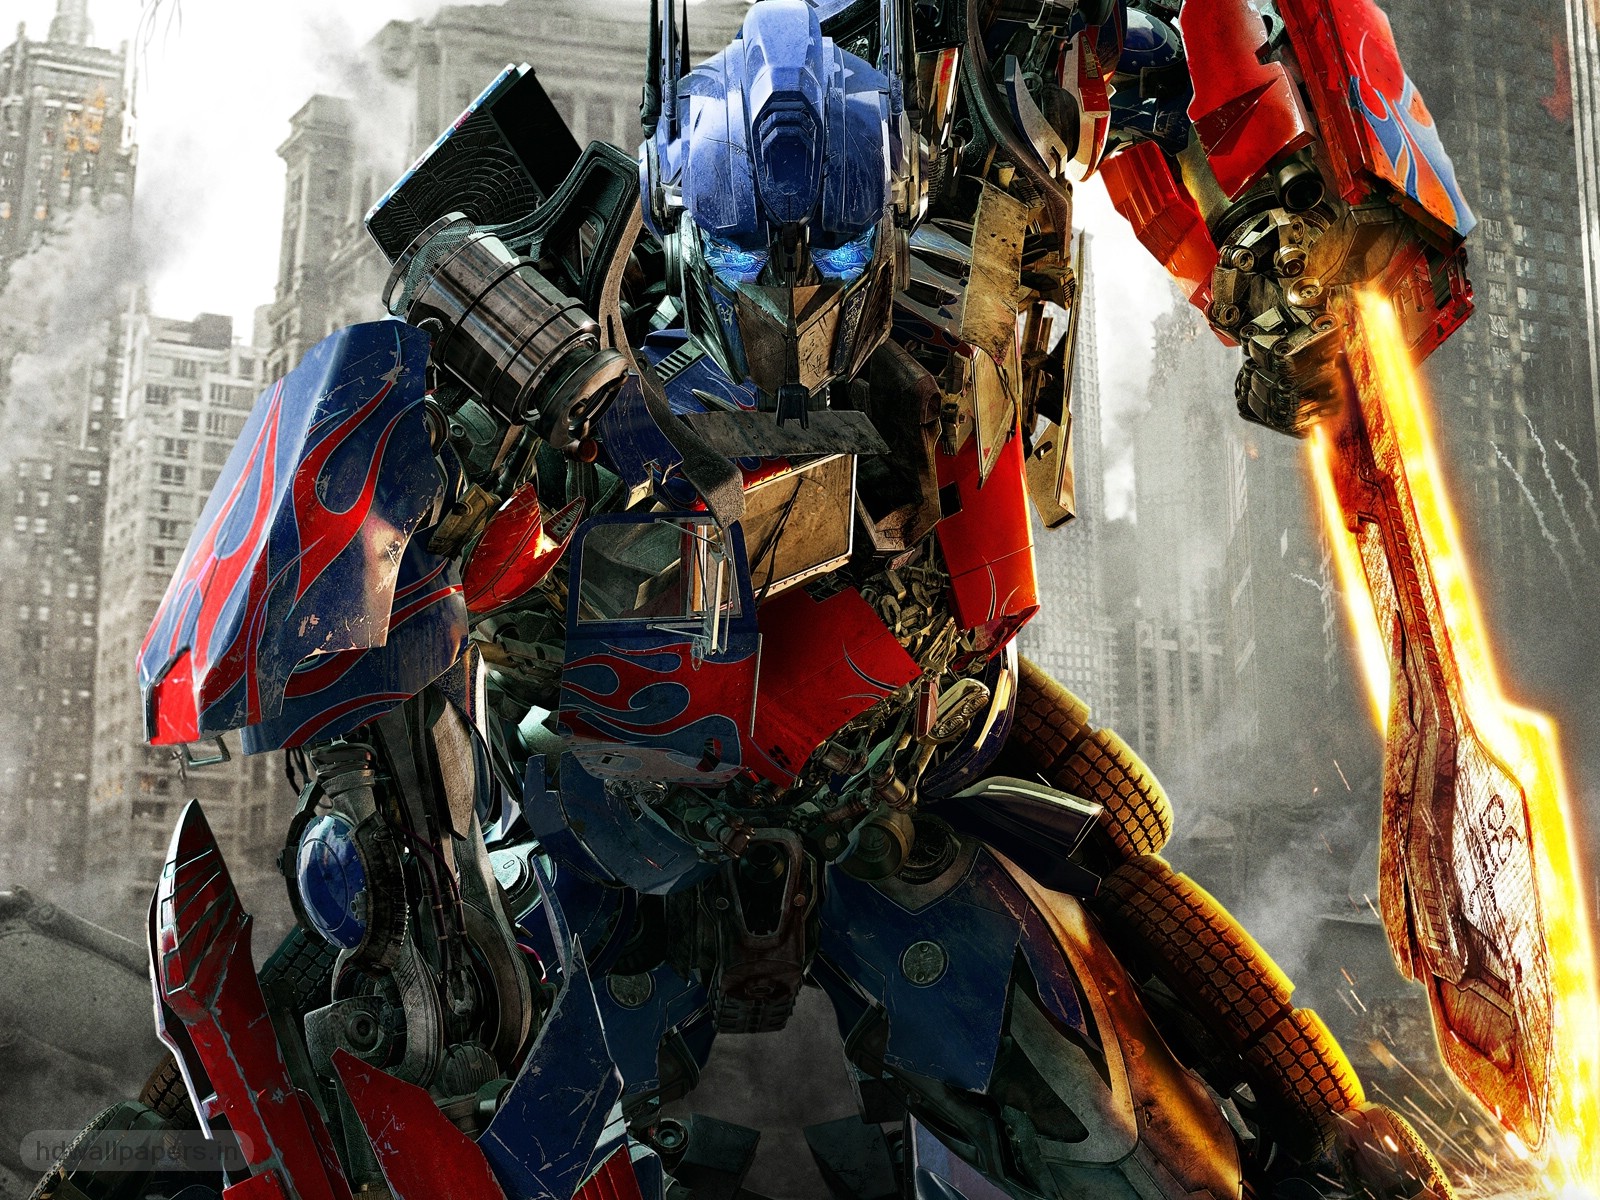 Transformers: Dark Of The Moon Backgrounds, Compatible - PC, Mobile, Gadgets| 1600x1200 px